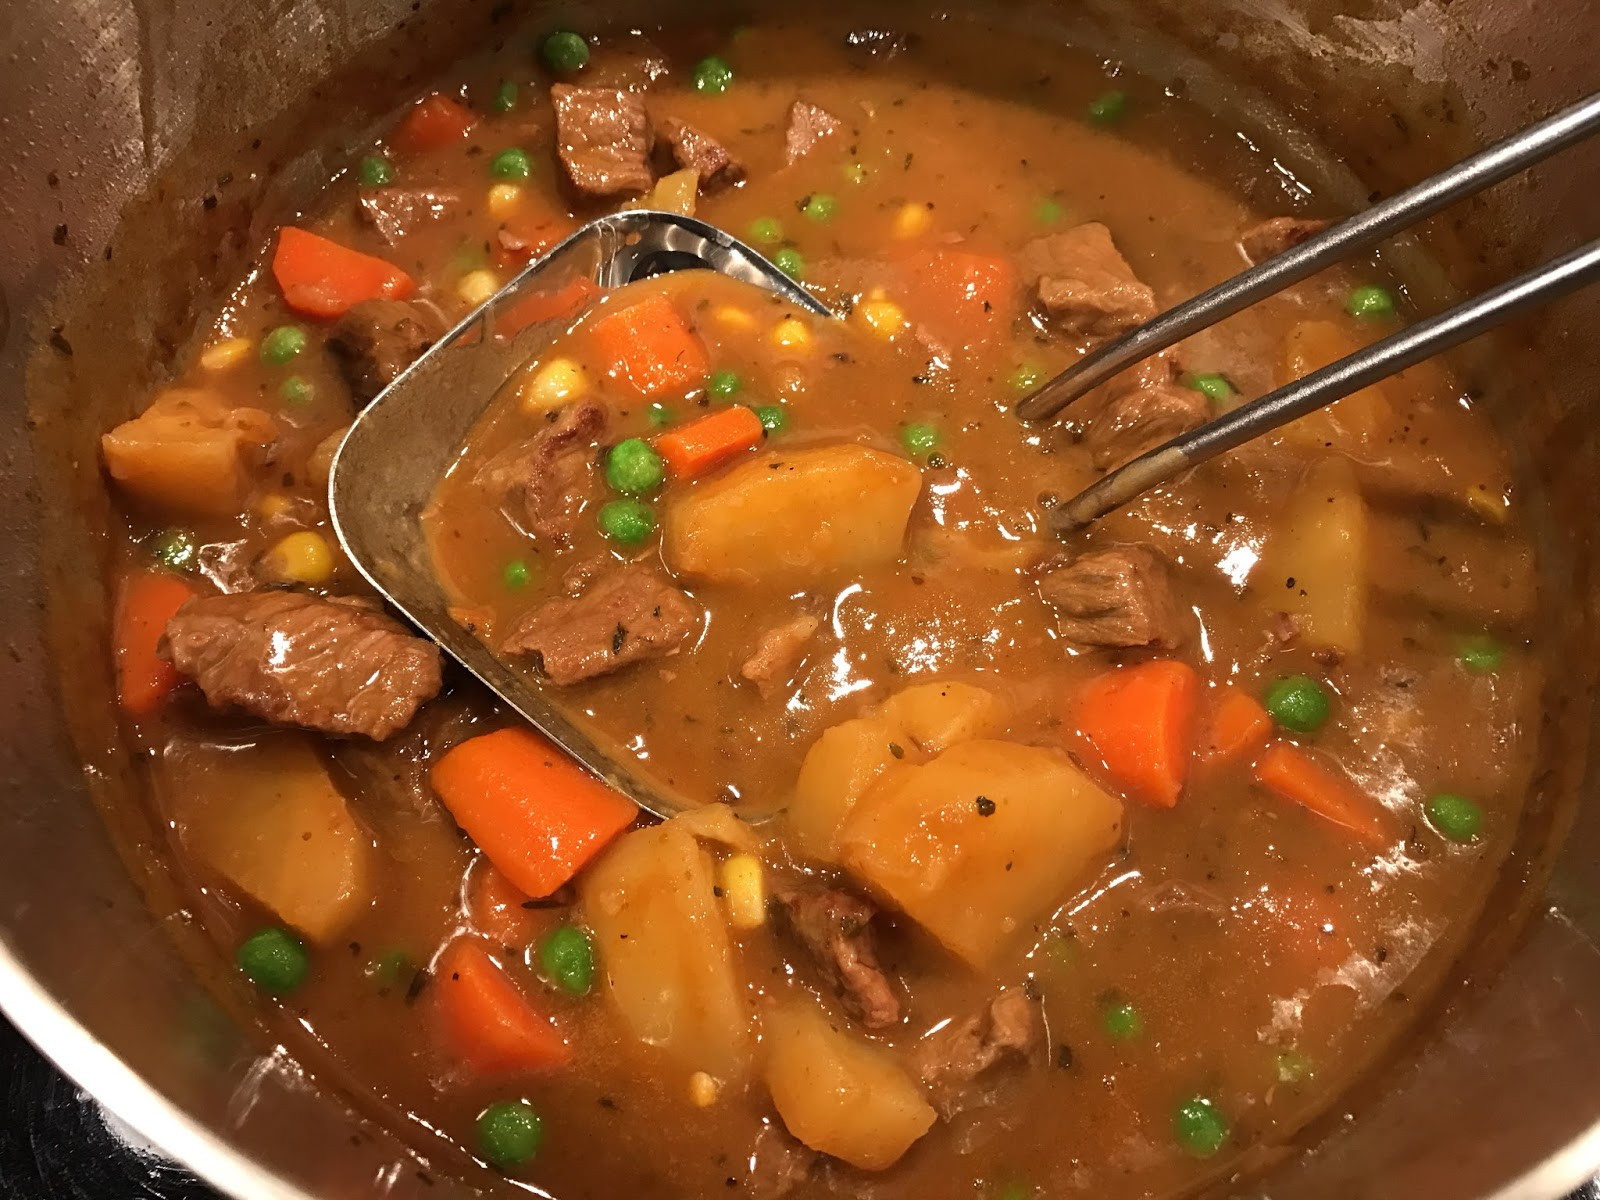 Beef Stew Recipe Stove Top
 Savory Stove Top Beef Stew